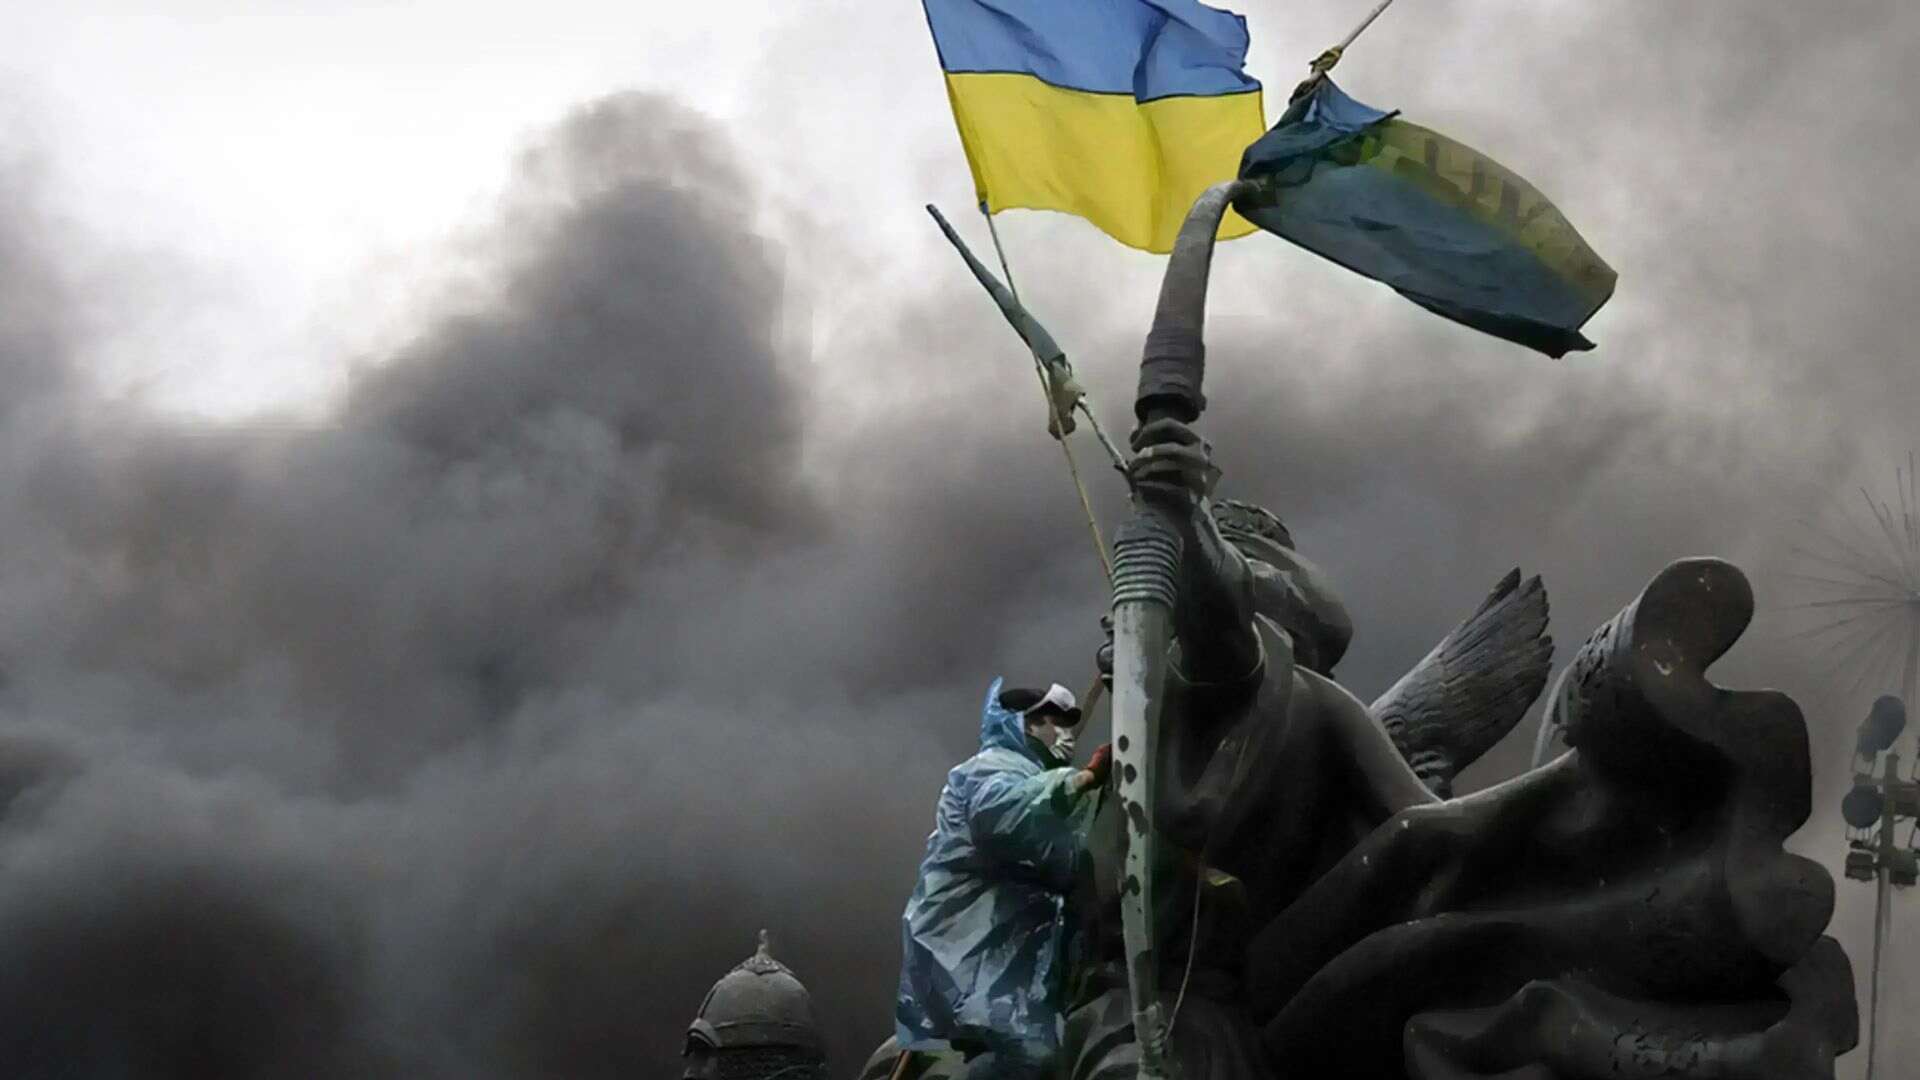 Dangers Of Escalation: A Call for Caution In The Ukraine Conflict